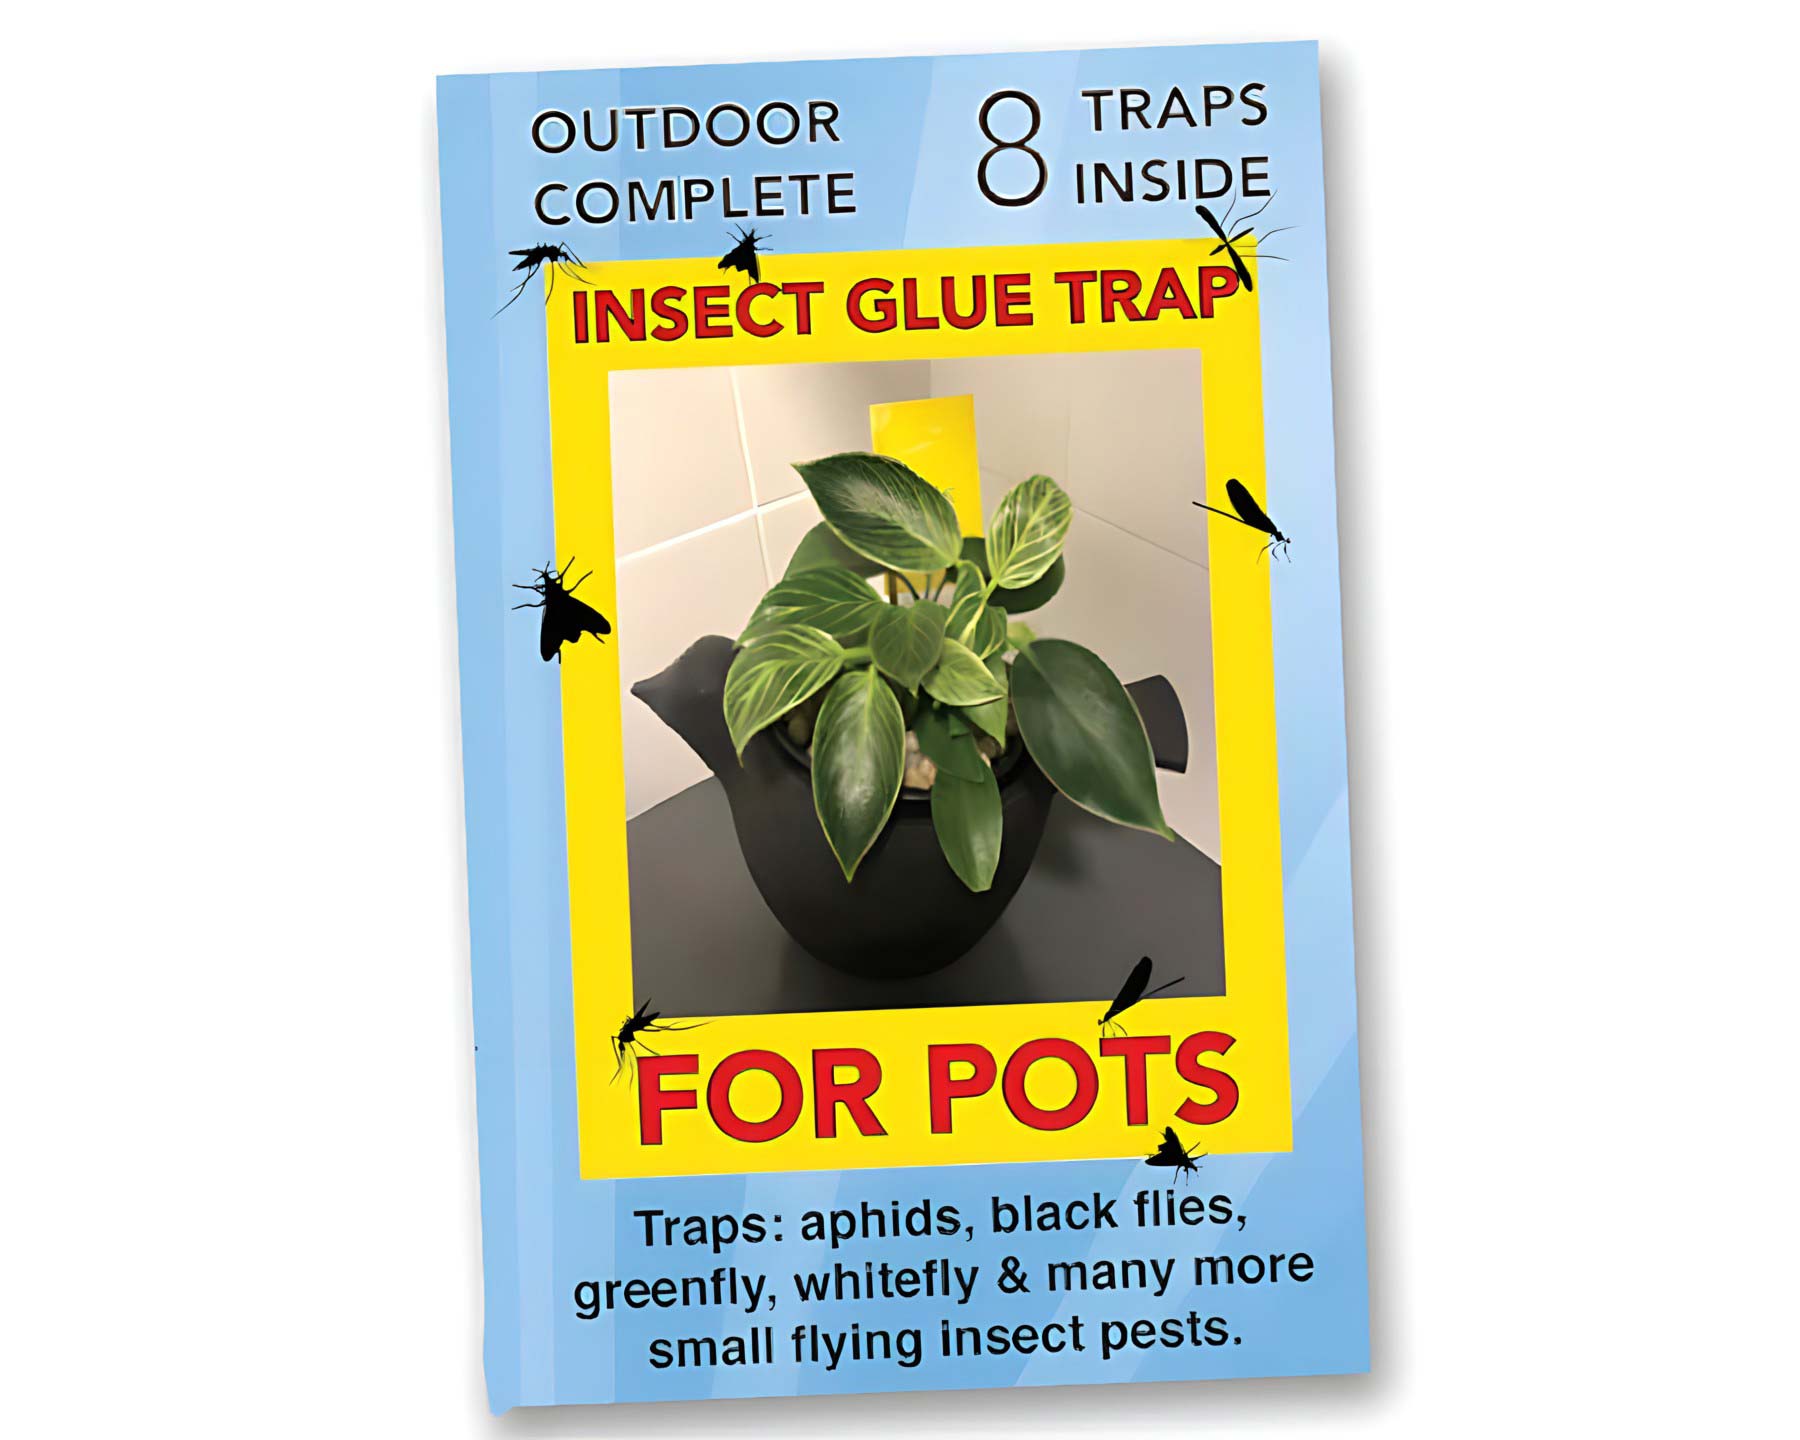 Insect Glue Trap for Pots